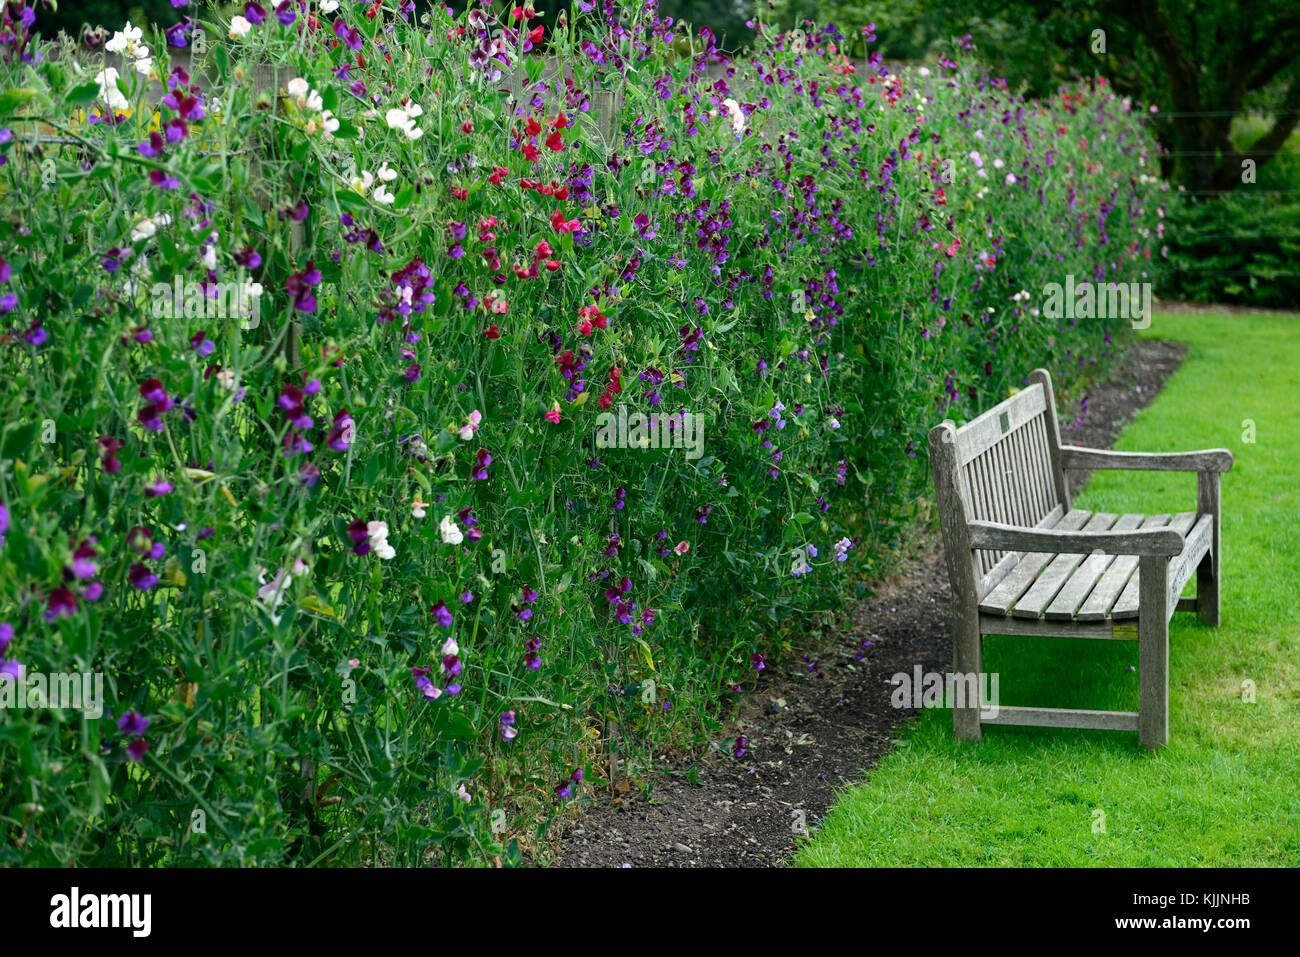 lathyrus, sweet peas,sweet pea, trellis, fence, grow, growing up, plant supports, frame ,frames, summer, annuals ,climbers, climbing flowers, scented, Stock Photo